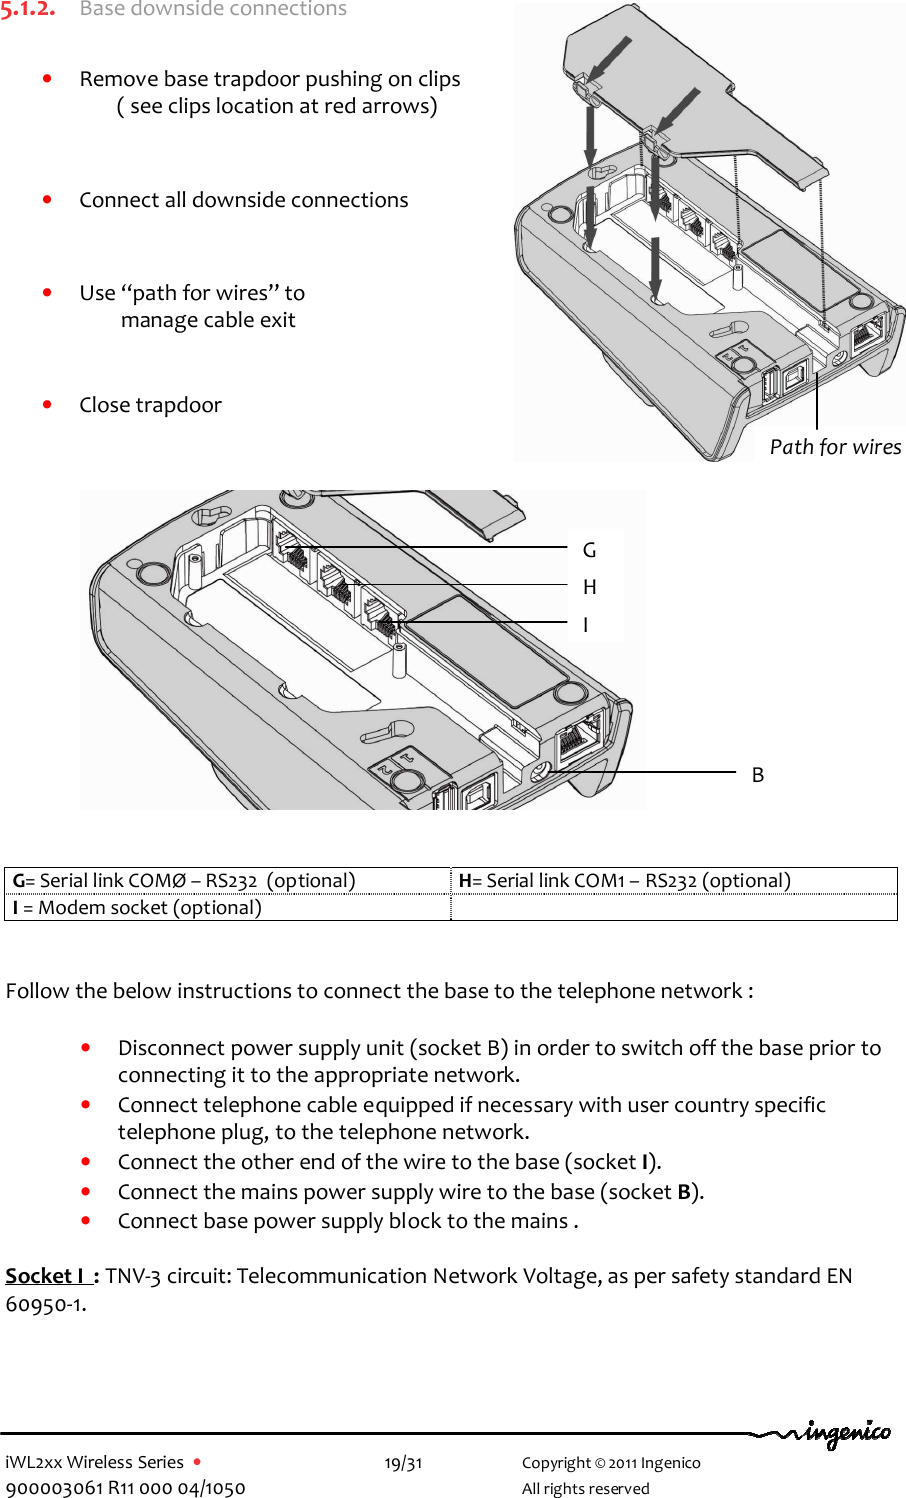  iWL2xx Wireless Series  •    19/31   Copyright © 2011 Ingenico 900003061 R11 000 04/1050     All rights reserved 5.1.2. Base downside connections  • Remove base trapdoor pushing on clips ( see clips location at red arrows)    • Connect all downside connections   • Use “path for wires” to                        manage cable exit   • Close trapdoor               G= Serial link COMØ – RS232  (optional)  H= Serial link COM1 – RS232 (optional) I = Modem socket (optional)     Follow the below instructions to connect the base to the telephone network :  • Disconnect power supply unit (socket B) in order to switch off the base prior to connecting it to the appropriate network. • Connect telephone cable equipped if necessary with user country specific telephone plug, to the telephone network.  • Connect the other end of the wire to the base (socket I).  • Connect the mains power supply wire to the base (socket B). • Connect base power supply block to the mains .   Socket I  : TNV-3 circuit: Telecommunication Network Voltage, as per safety standard EN 60950-1.    Path for wires G H I B 